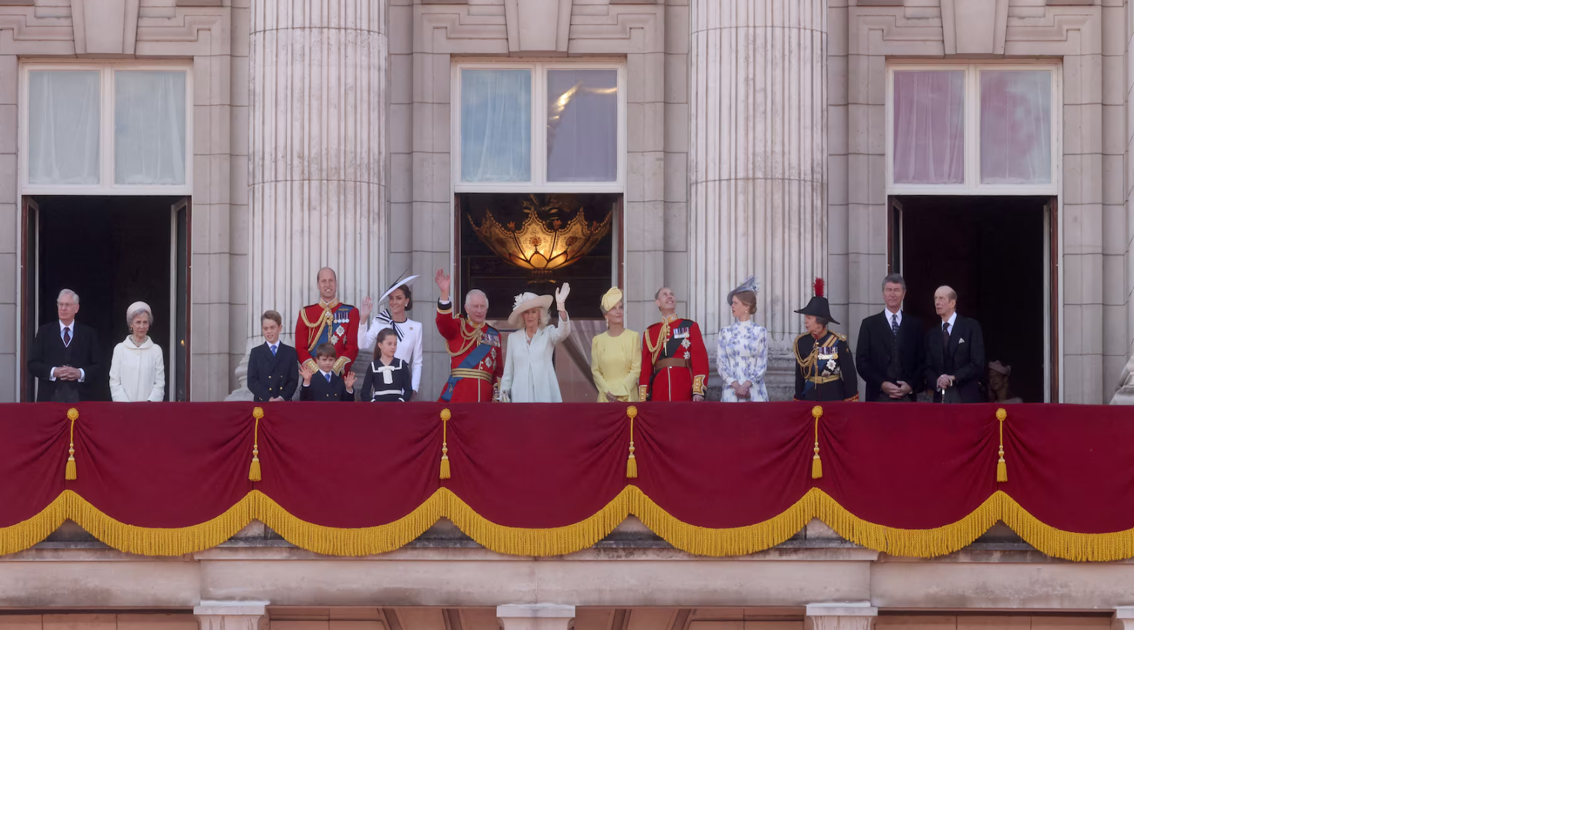 Buckingham Palace opens room with famous balcony to visitors | Lifestyle